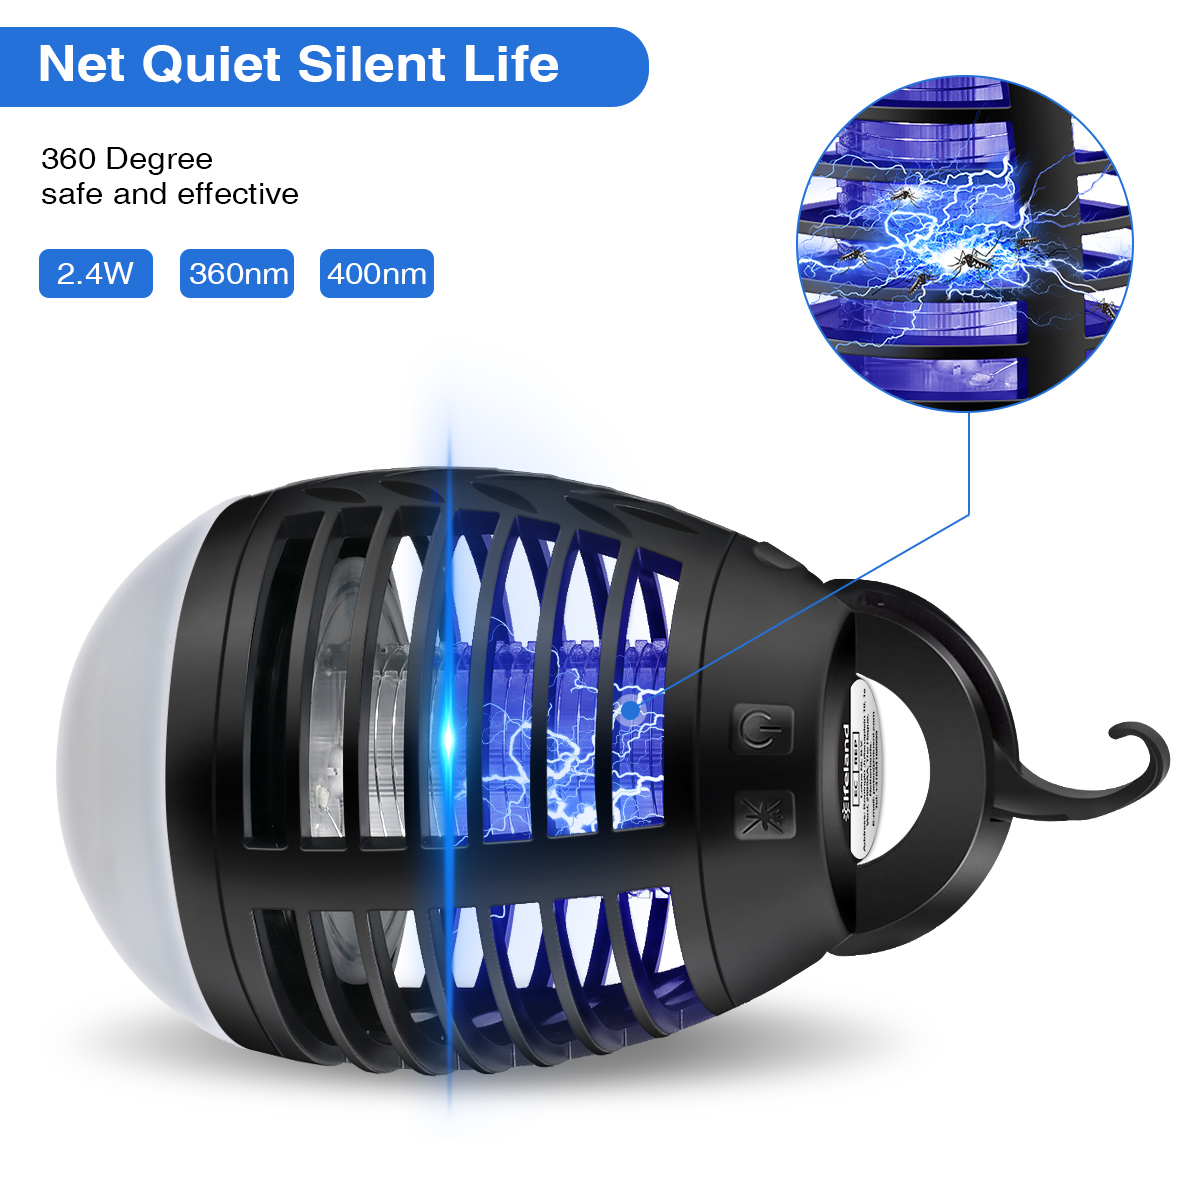 Elfeland-5W-Electric-Mosquito-Killer-Lamp-USB-Powered-Trap-Gnat-with-Hanger-for-Indoor-Outdoor-1710190-2